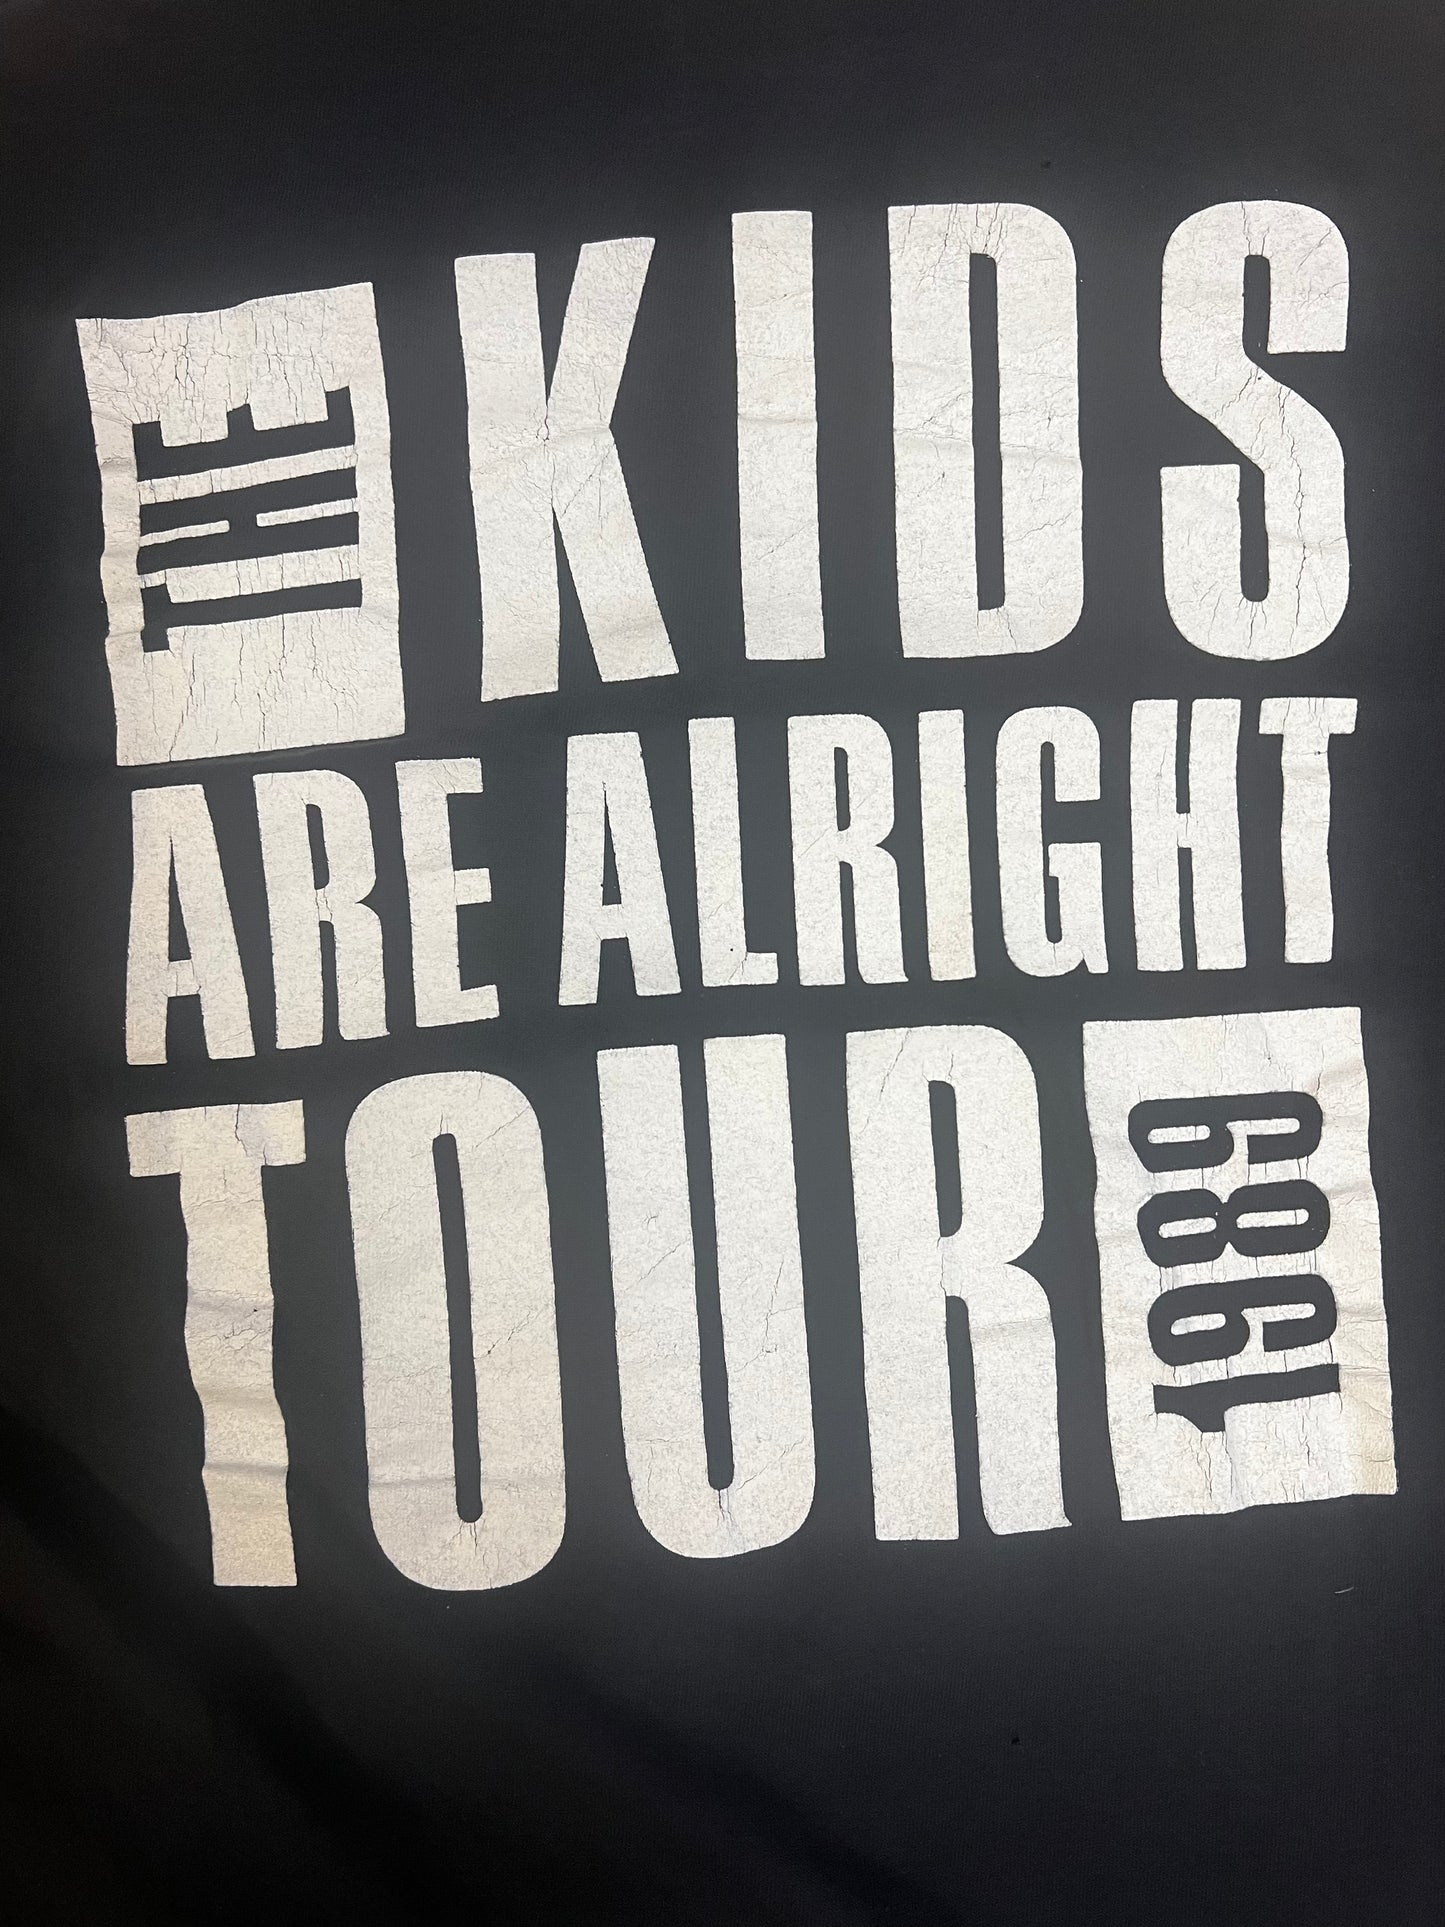 1989 Vintage The Who "The Kids Are Alright" tour band T-shirt